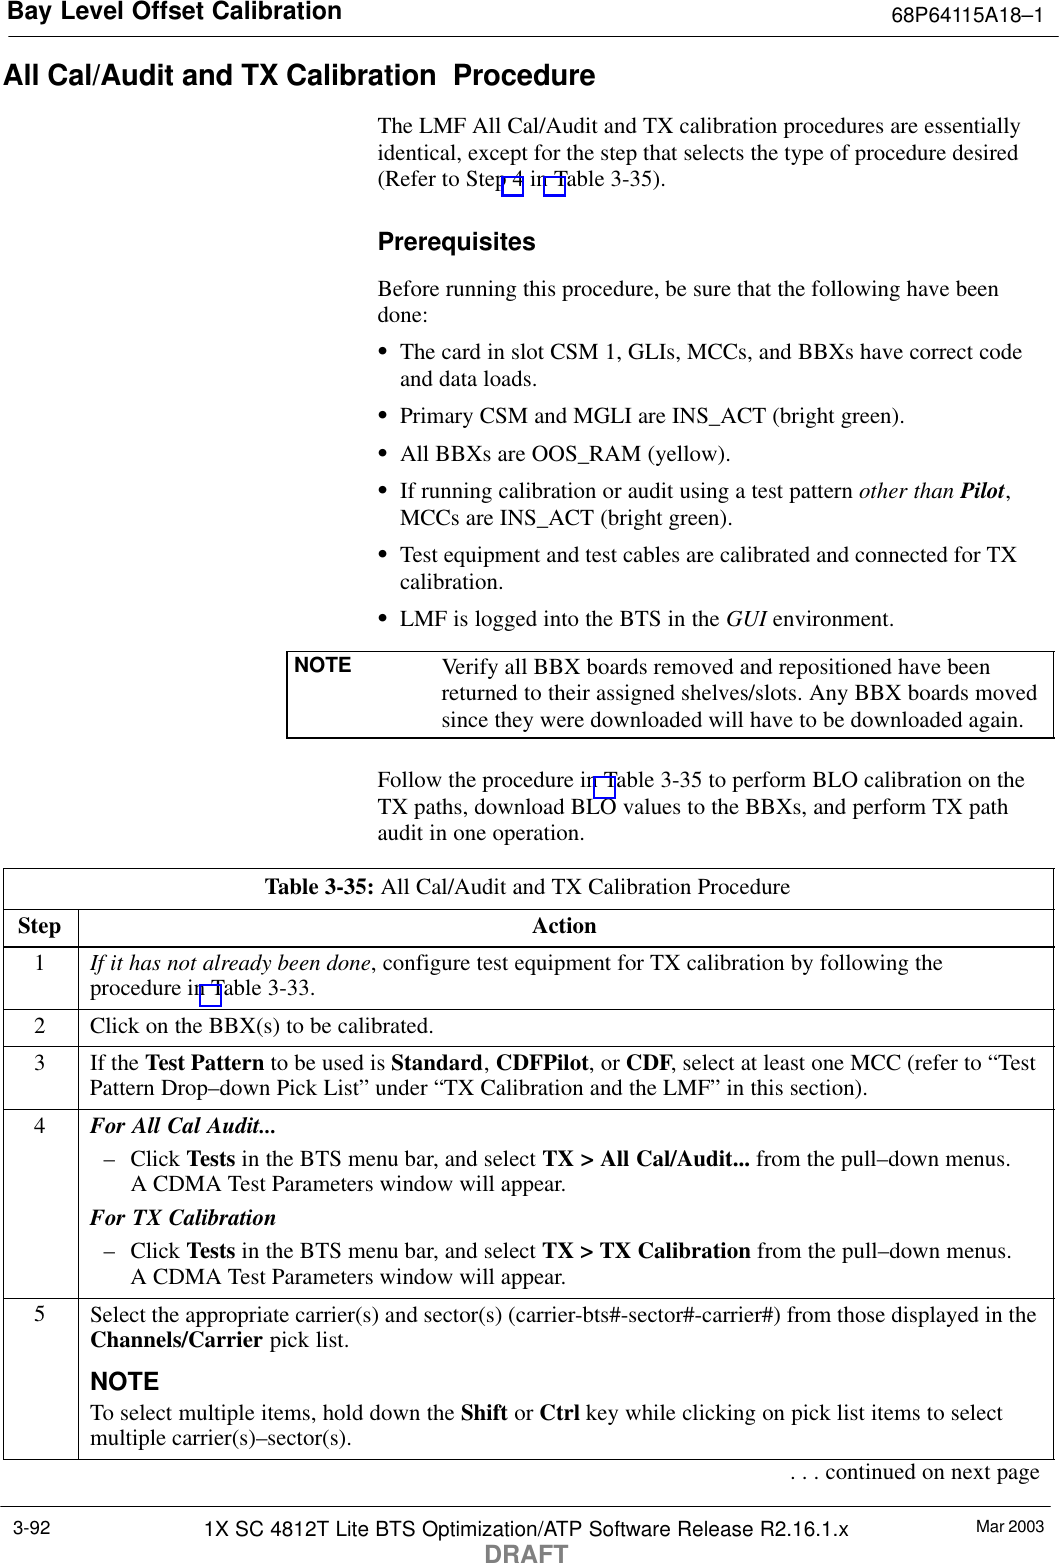 Bay Level Offset Calibration 68P64115A18–1Mar 20031X SC 4812T Lite BTS Optimization/ATP Software Release R2.16.1.xDRAFT3-92All Cal/Audit and TX Calibration  ProcedureThe LMF All Cal/Audit and TX calibration procedures are essentiallyidentical, except for the step that selects the type of procedure desired(Refer to Step 4 in Table 3-35).PrerequisitesBefore running this procedure, be sure that the following have beendone:SThe card in slot CSM 1, GLIs, MCCs, and BBXs have correct codeand data loads.SPrimary CSM and MGLI are INS_ACT (bright green).SAll BBXs are OOS_RAM (yellow).SIf running calibration or audit using a test pattern other than Pilot,MCCs are INS_ACT (bright green).STest equipment and test cables are calibrated and connected for TXcalibration.SLMF is logged into the BTS in the GUI environment.NOTE Verify all BBX boards removed and repositioned have beenreturned to their assigned shelves/slots. Any BBX boards movedsince they were downloaded will have to be downloaded again.Follow the procedure in Table 3-35 to perform BLO calibration on theTX paths, download BLO values to the BBXs, and perform TX pathaudit in one operation.Table 3-35: All Cal/Audit and TX Calibration ProcedureStep Action1If it has not already been done, configure test equipment for TX calibration by following theprocedure in Table 3-33.2Click on the BBX(s) to be calibrated.3If the Test Pattern to be used is Standard, CDFPilot, or CDF, select at least one MCC (refer to “TestPattern Drop–down Pick List” under “TX Calibration and the LMF” in this section).4For All Cal Audit...– Click Tests in the BTS menu bar, and select TX &gt; All Cal/Audit... from the pull–down menus.A CDMA Test Parameters window will appear.For TX Calibration– Click Tests in the BTS menu bar, and select TX &gt; TX Calibration from the pull–down menus.A CDMA Test Parameters window will appear.5Select the appropriate carrier(s) and sector(s) (carrier-bts#-sector#-carrier#) from those displayed in theChannels/Carrier pick list.NOTETo select multiple items, hold down the Shift or Ctrl key while clicking on pick list items to selectmultiple carrier(s)–sector(s).. . . continued on next page